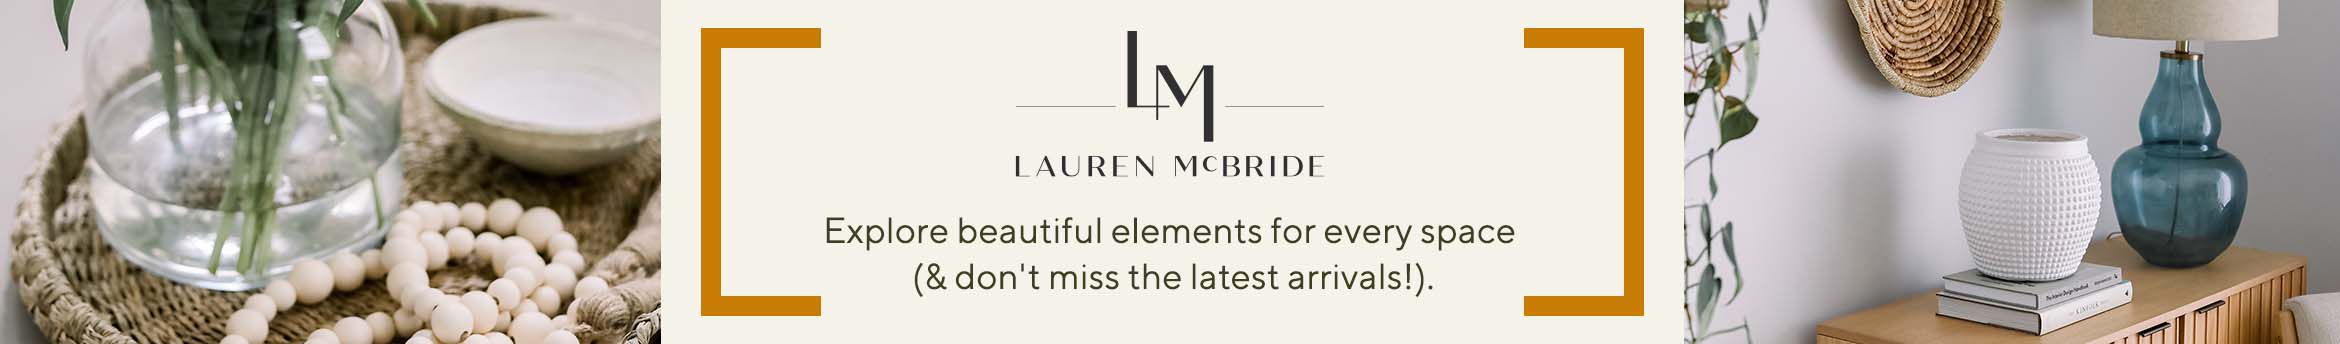 Lauren McBride Explore beautiful elements for every space (& don't miss the latest arrivals!).